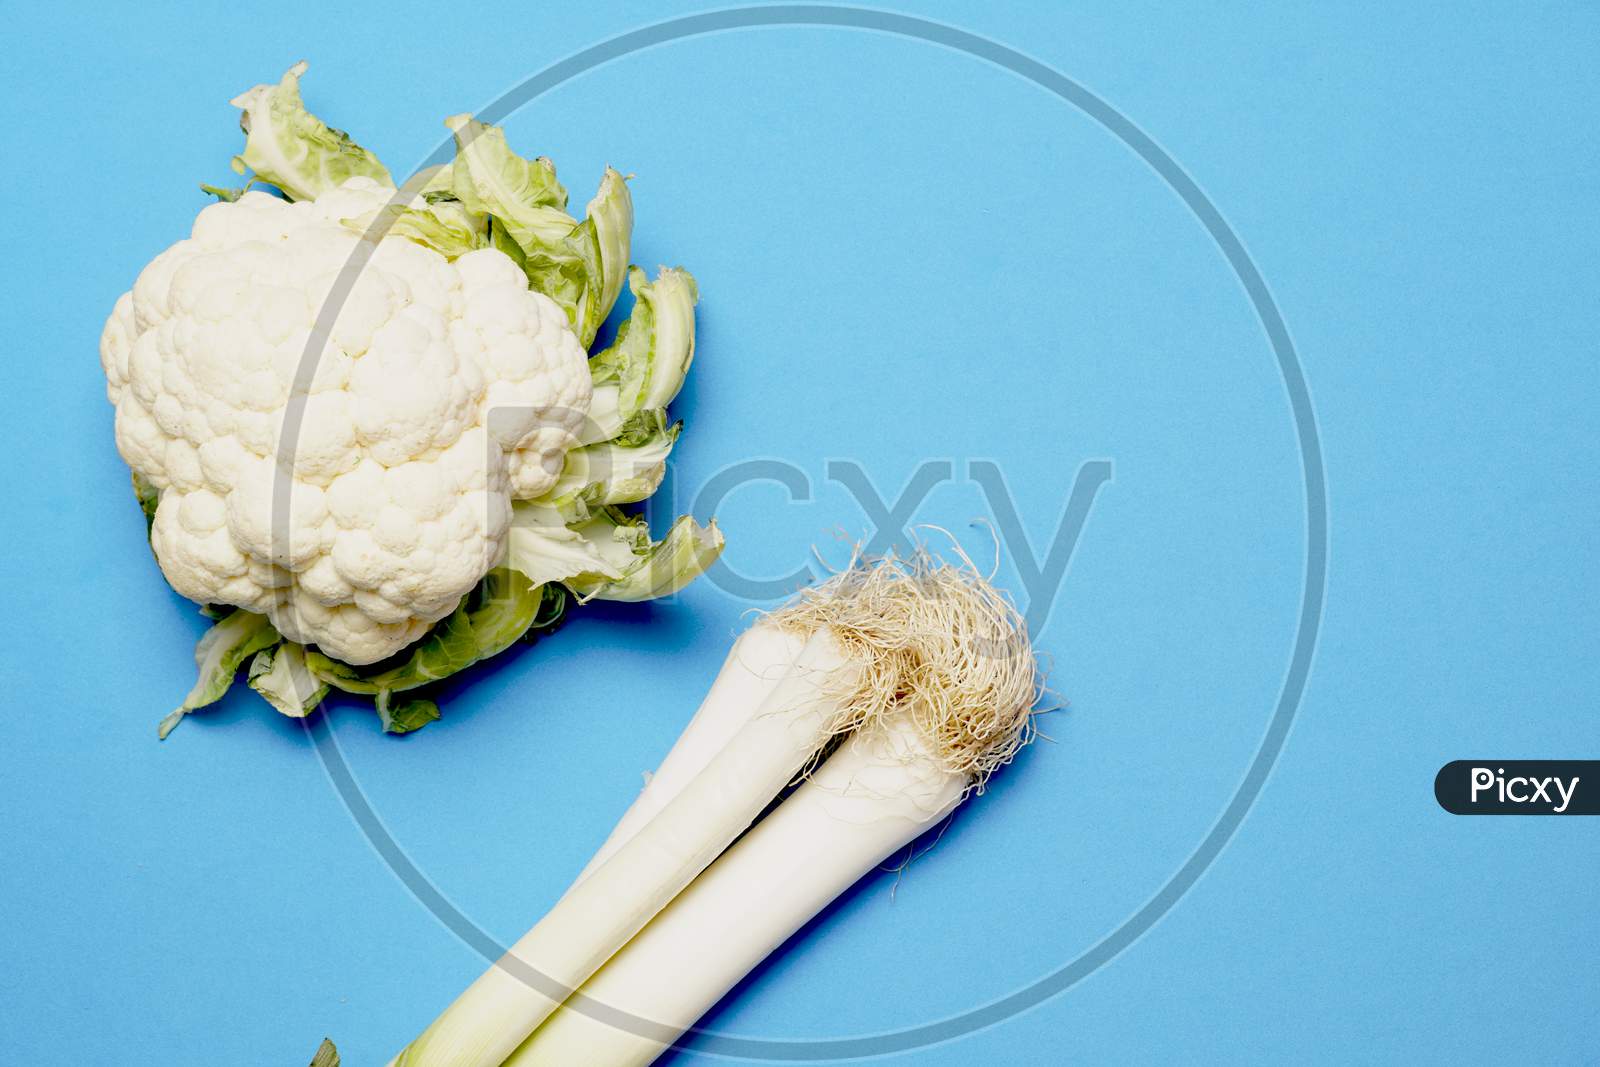 Top View Of Cauliflower And Leeks On Blue Background. Flat Lay . Vegetarian Or Vegan Concept